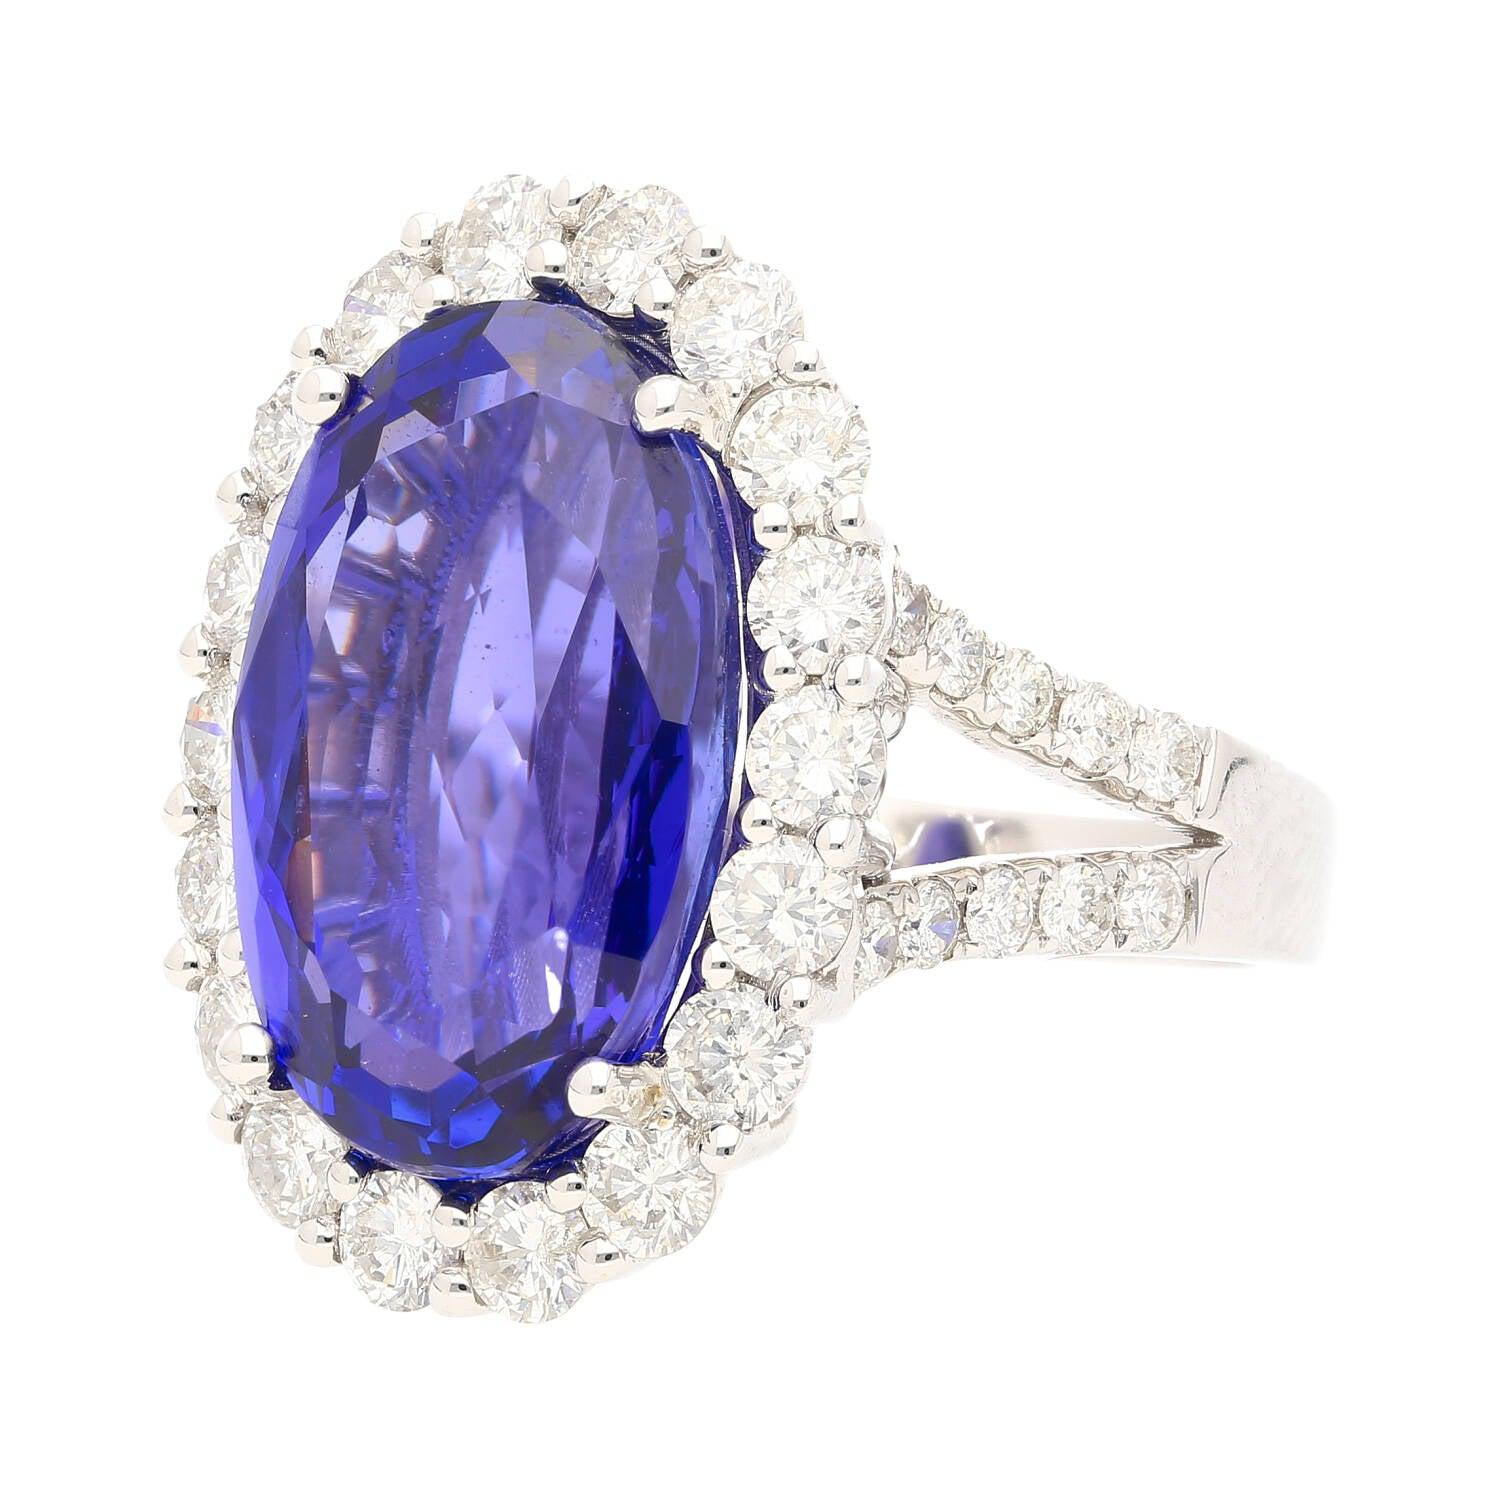 15_46-Carat-Oval-Cut-Fine-Tanzanite-and-Diamond-Halo-Ring-in-18k-White-Gold-With-Split-Shank-Setting-Rings-2.jpg